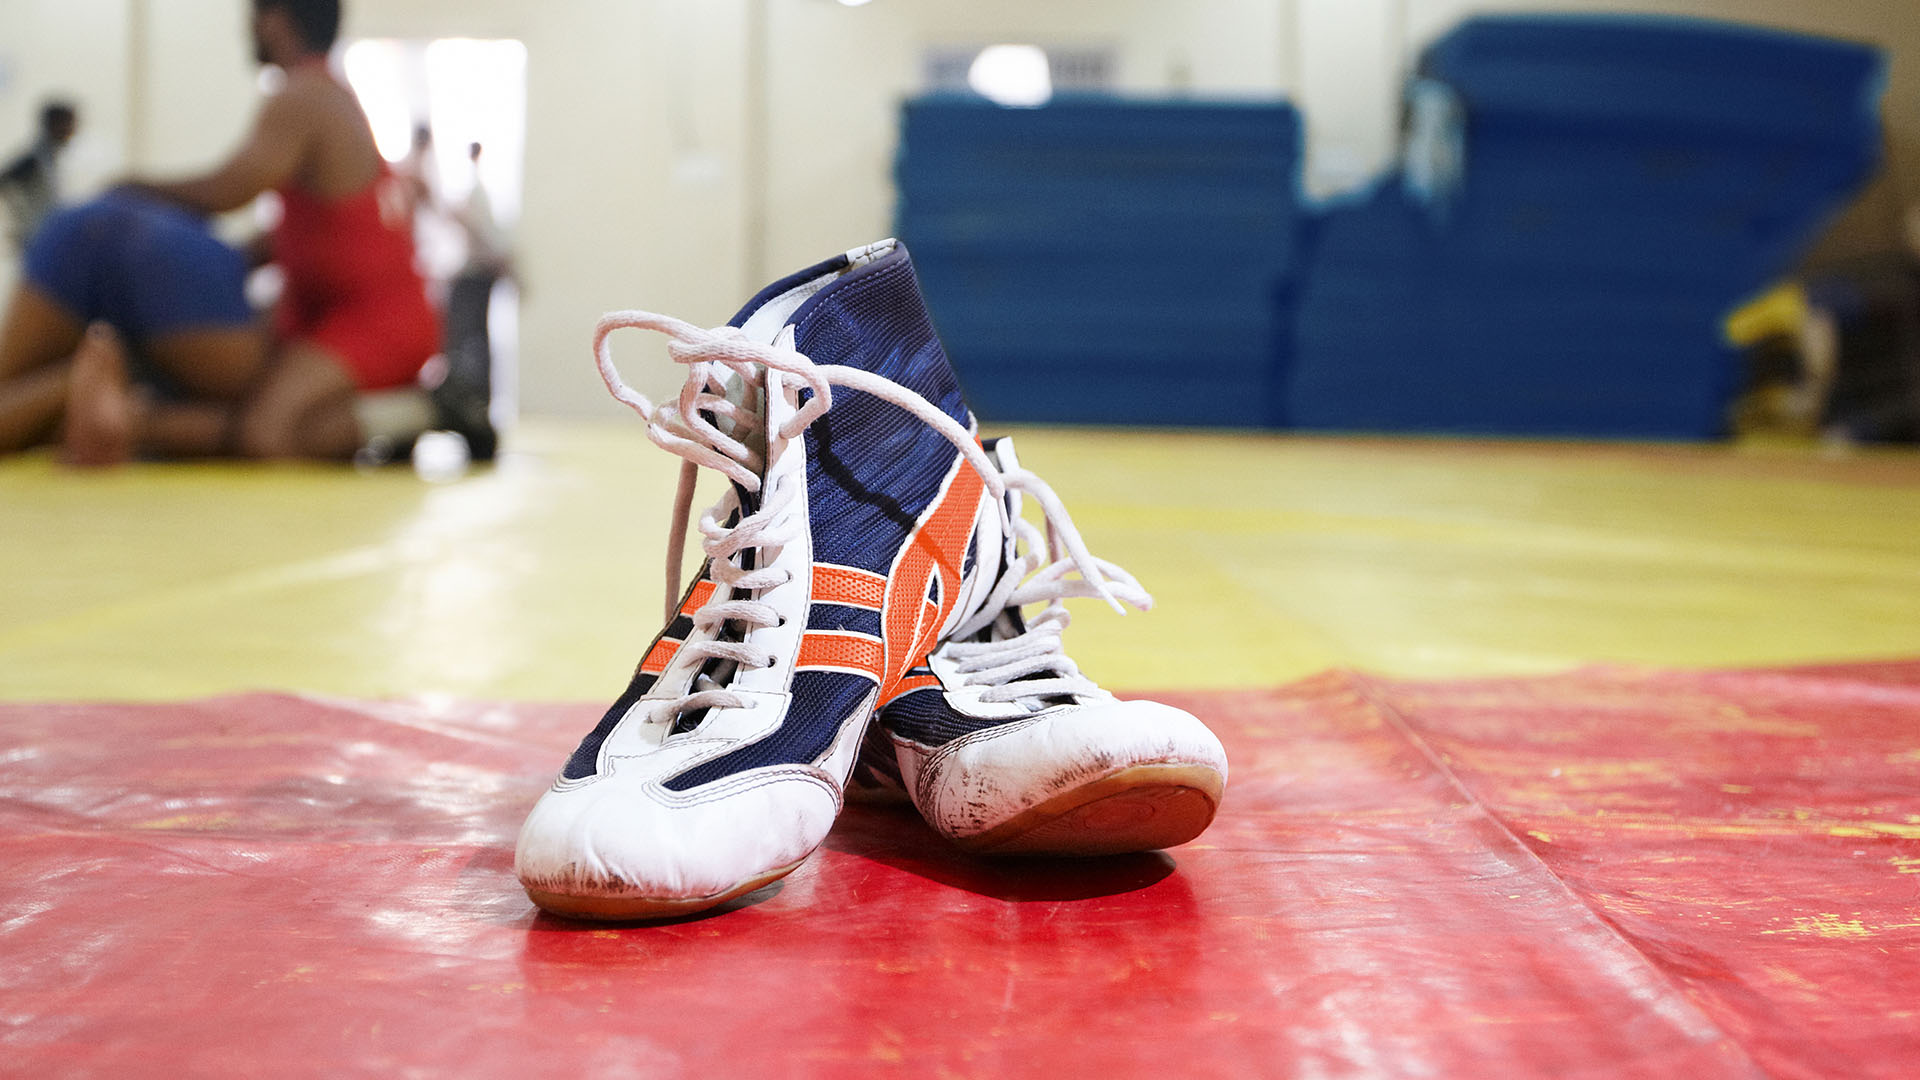 wrestling shoes on a gym floor